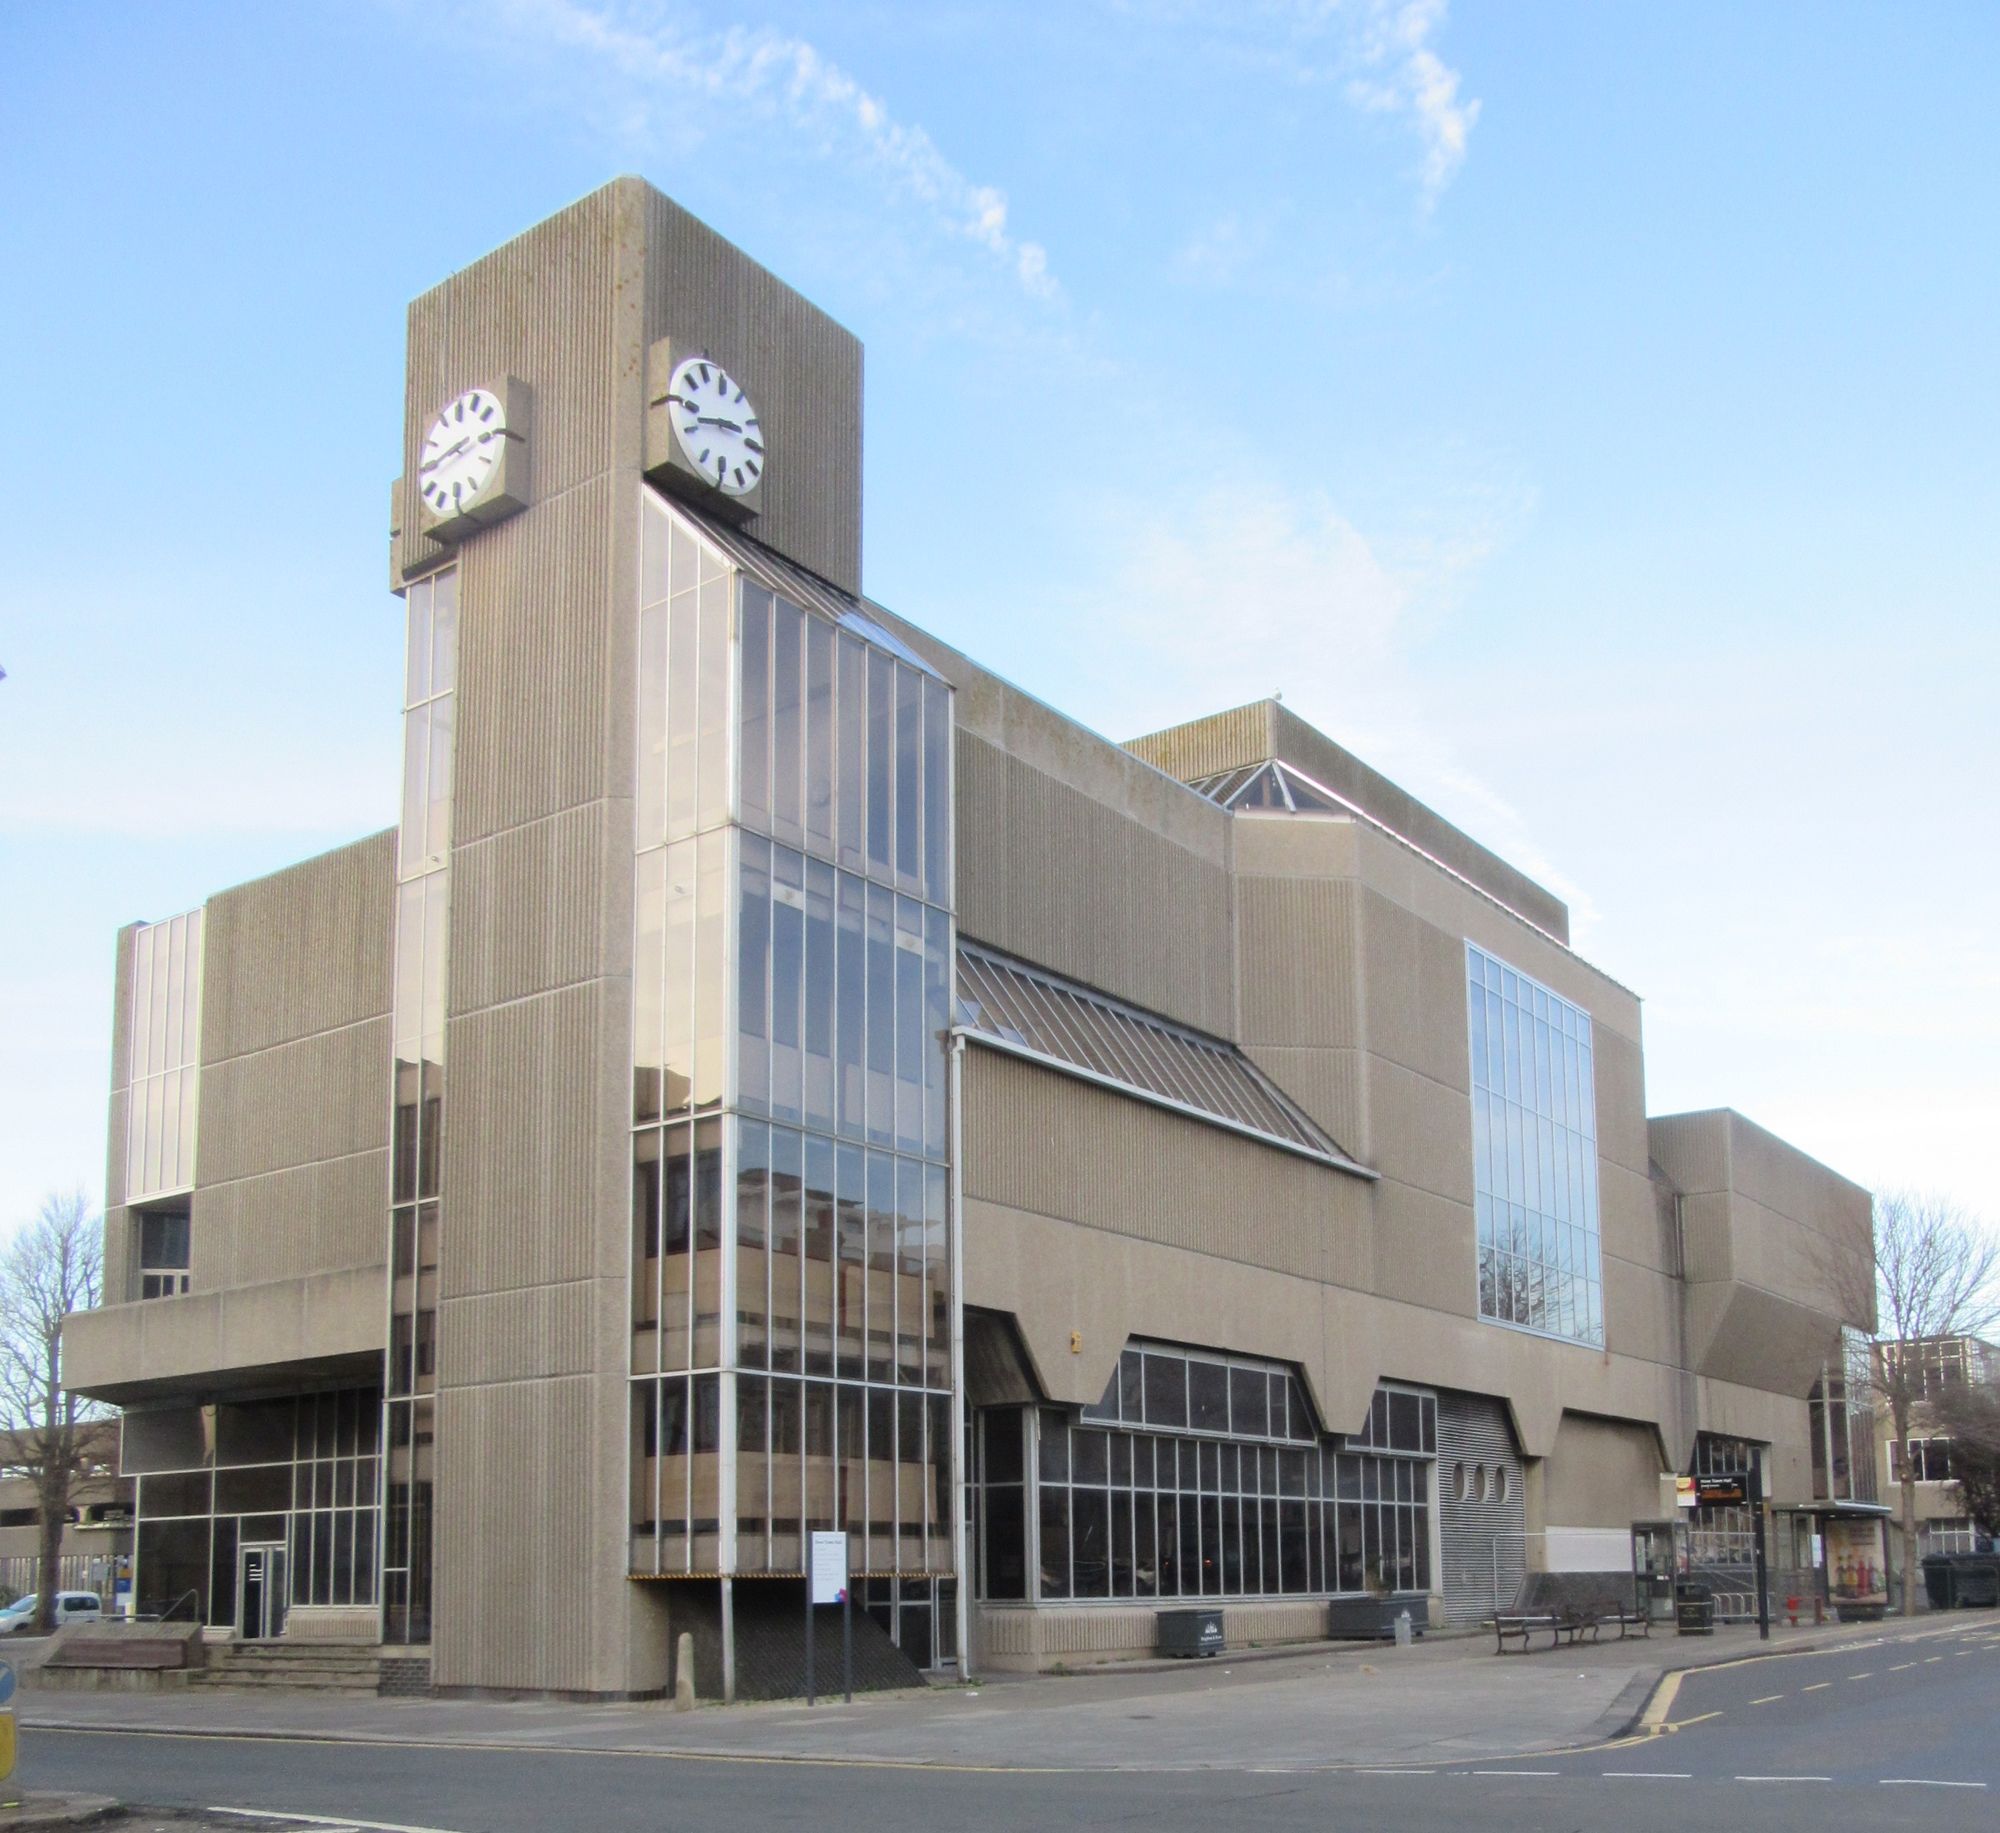 A picture of Hove Town Hall